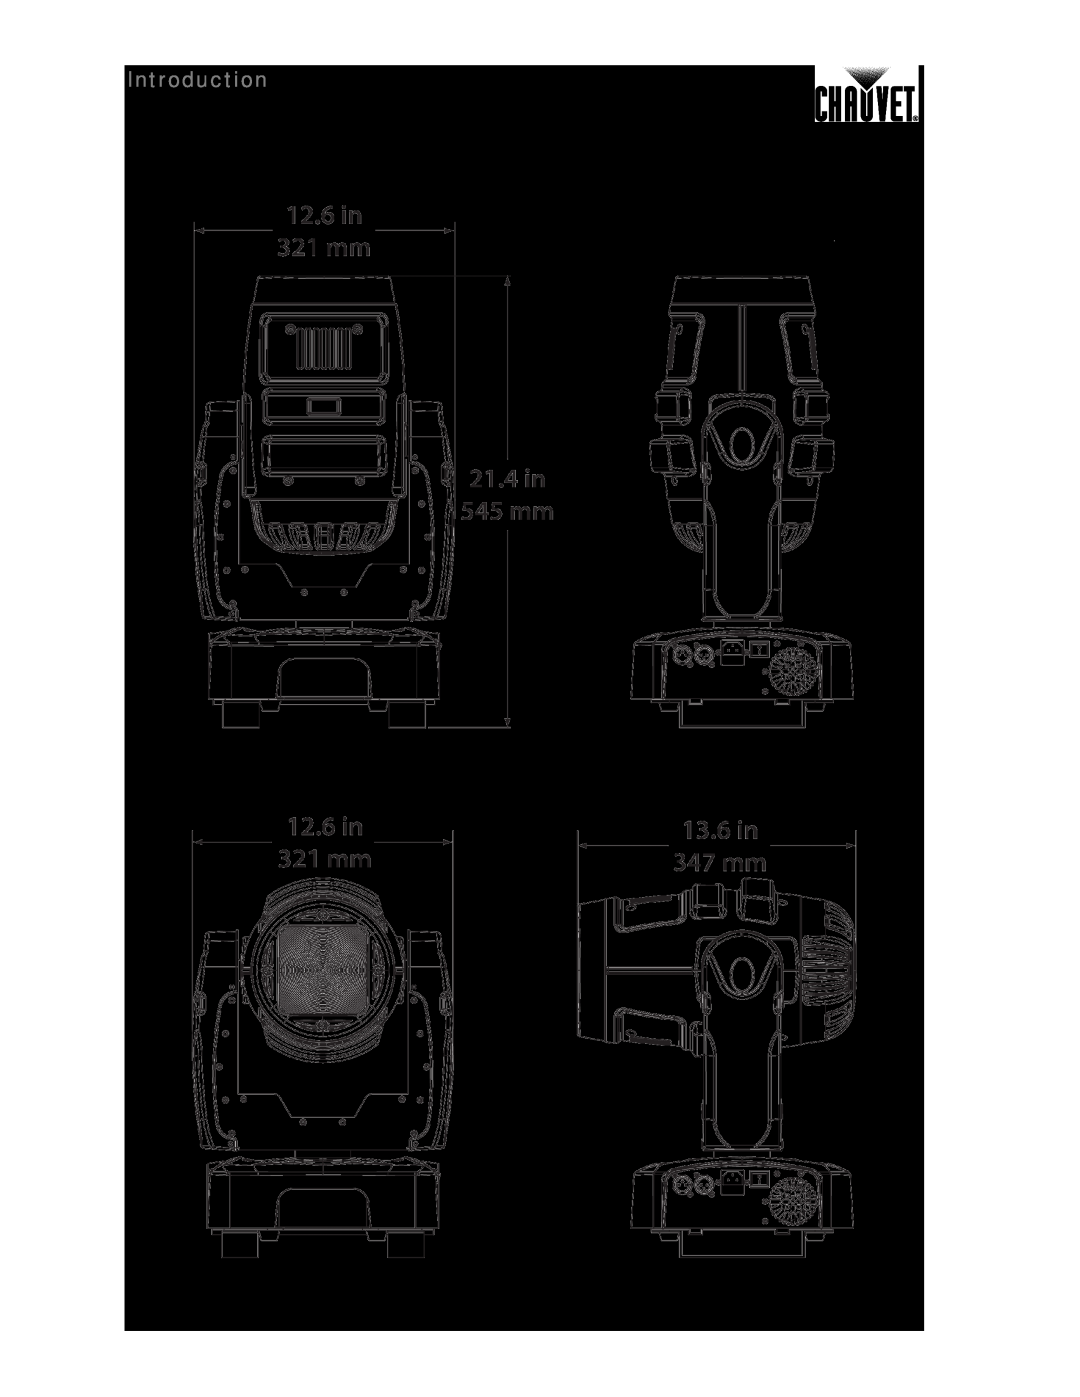 Chauvet 260 LED user manual Product Dimensions, Introduction 